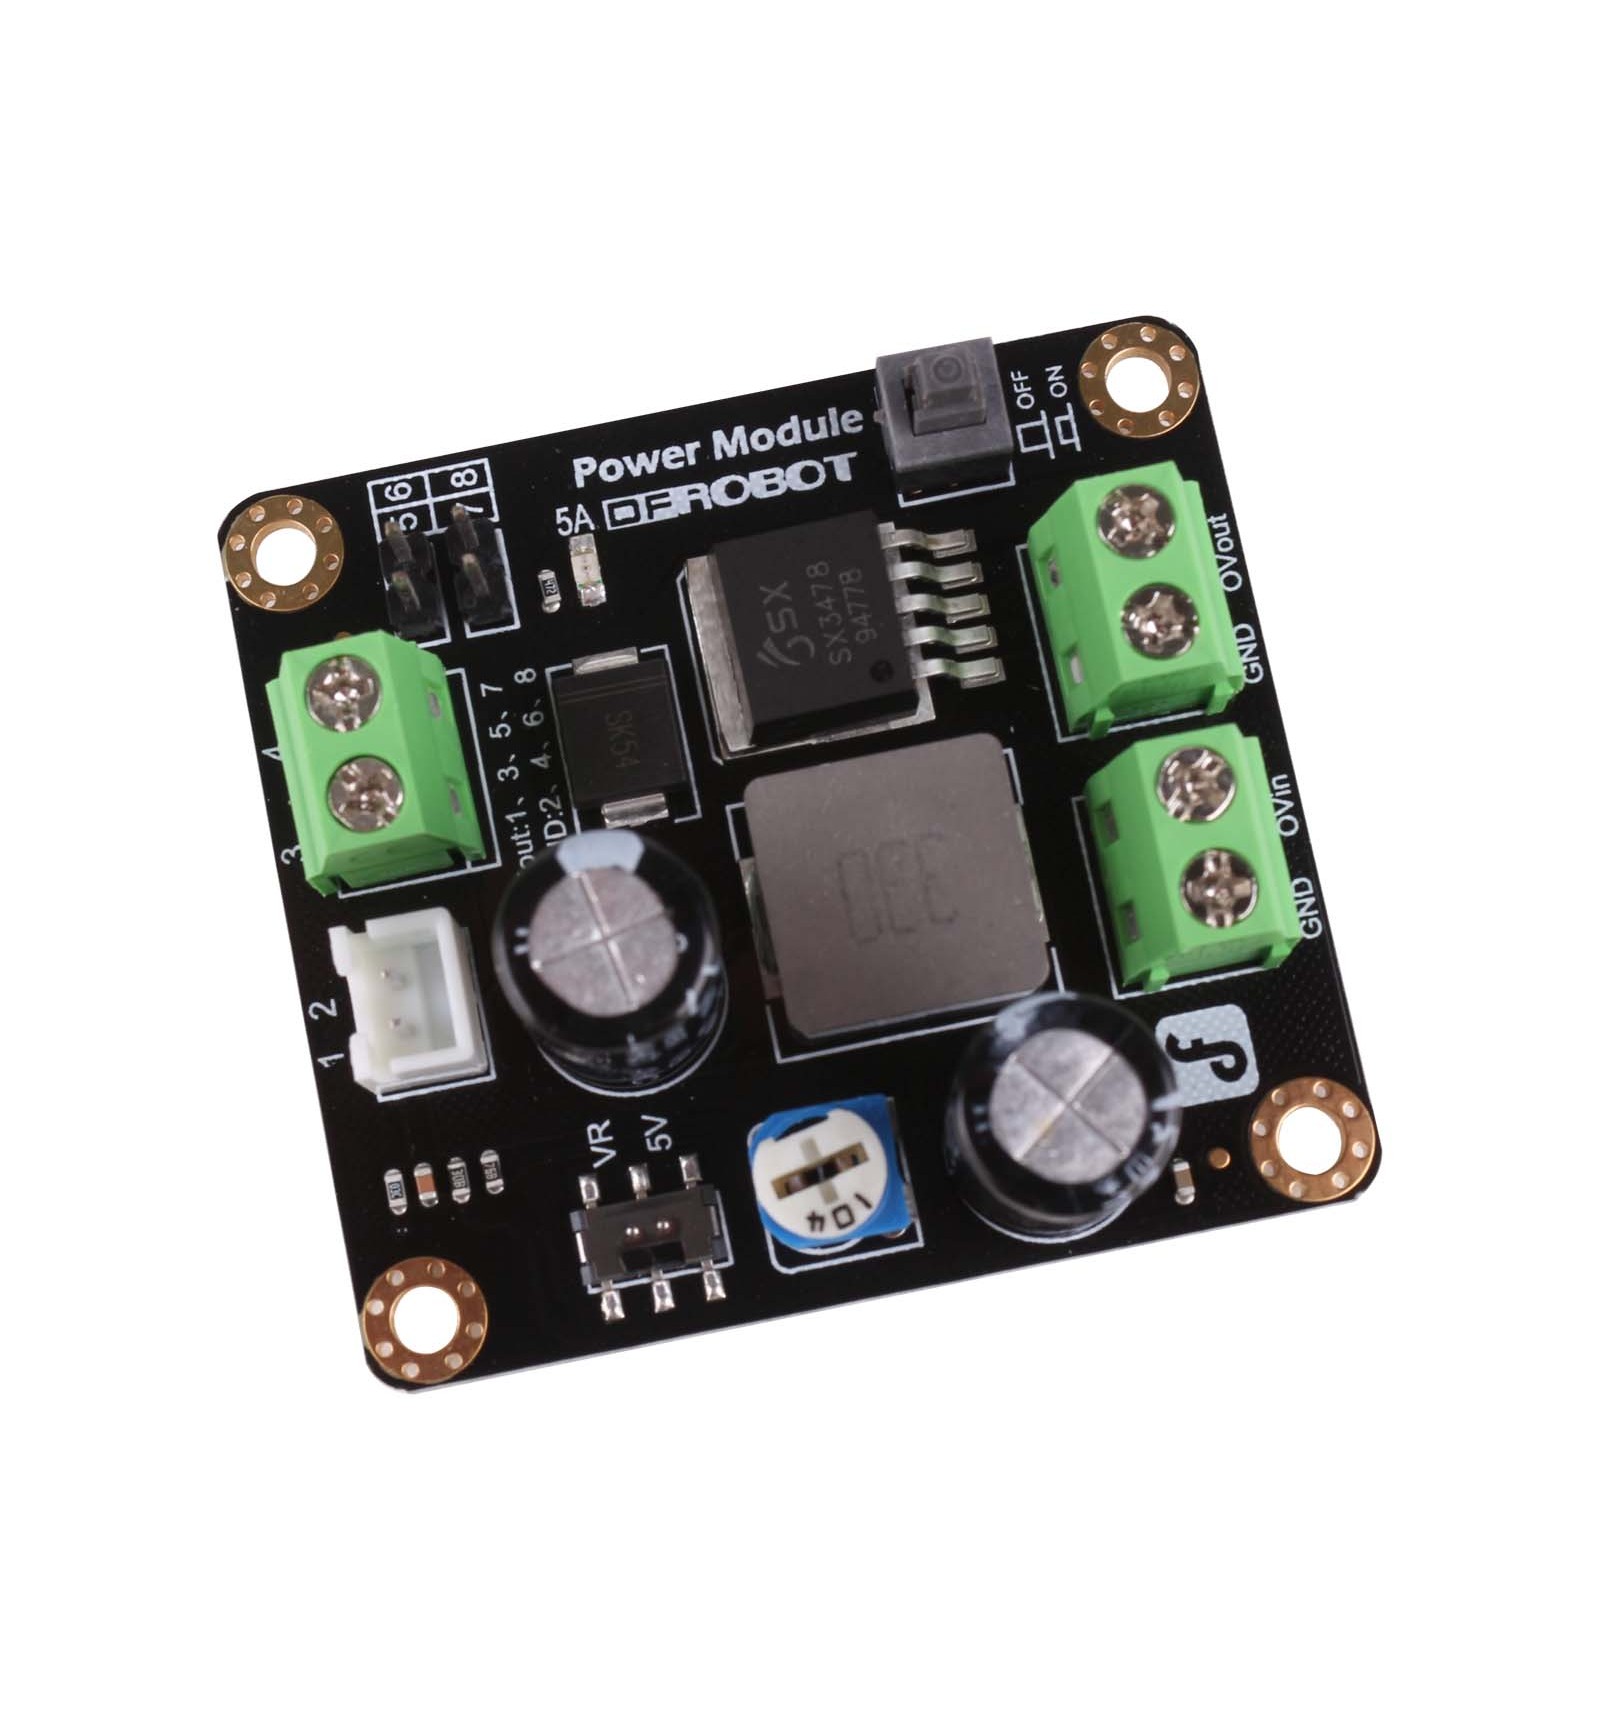 https://www.diyelectronics.co.za/store/12850-thickbox_default/dc-dc-step-down-buck-module-25w-max-adjustable-output.jpg